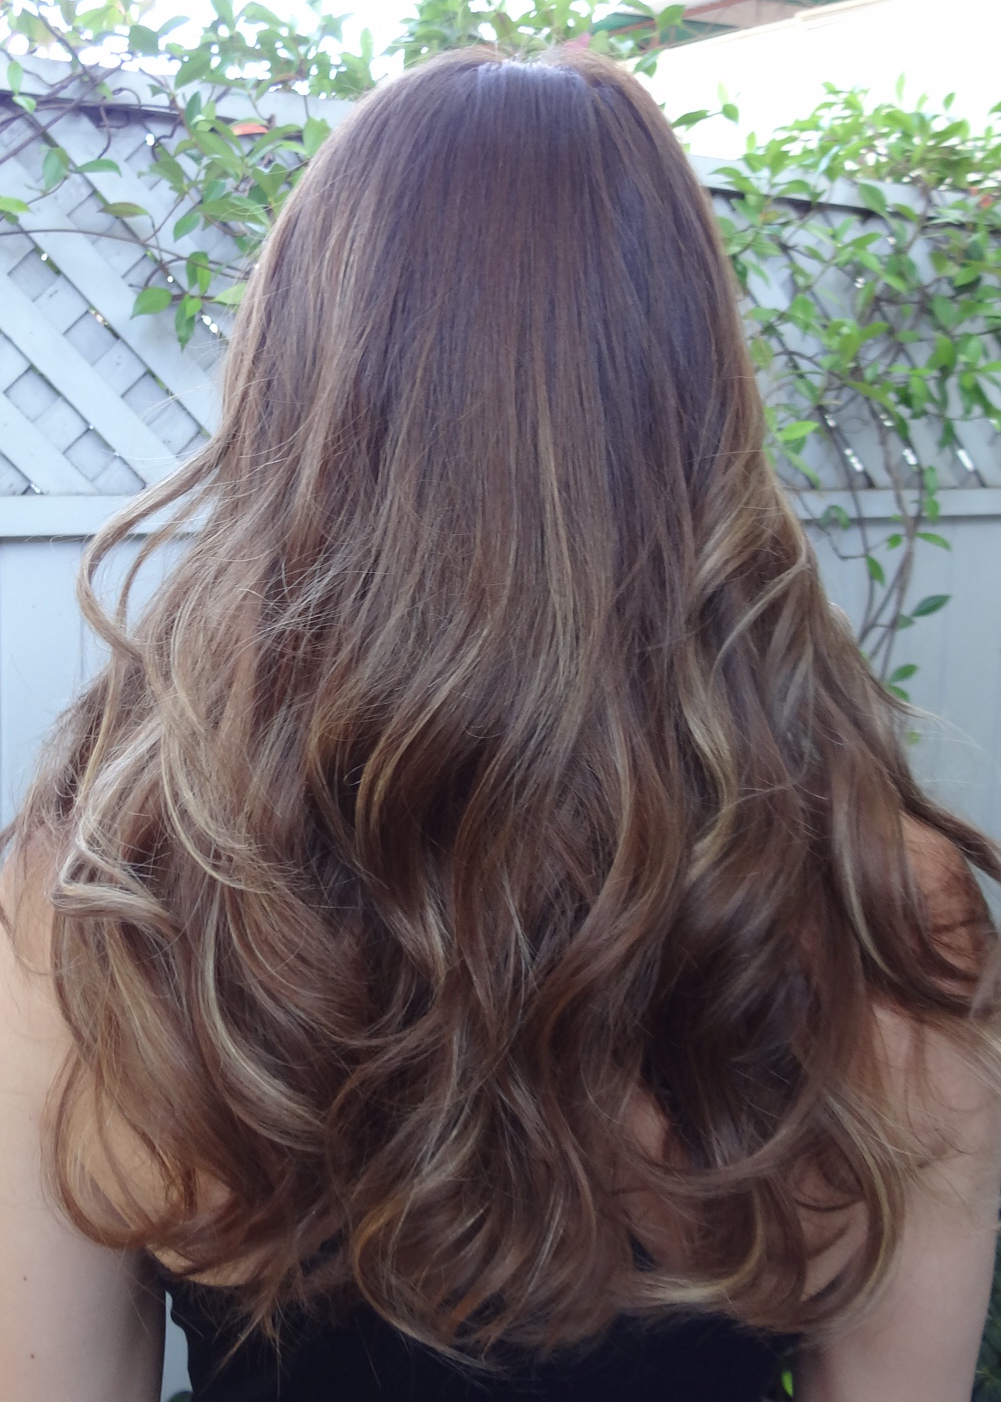 Dark Hair With Different Color Highlights